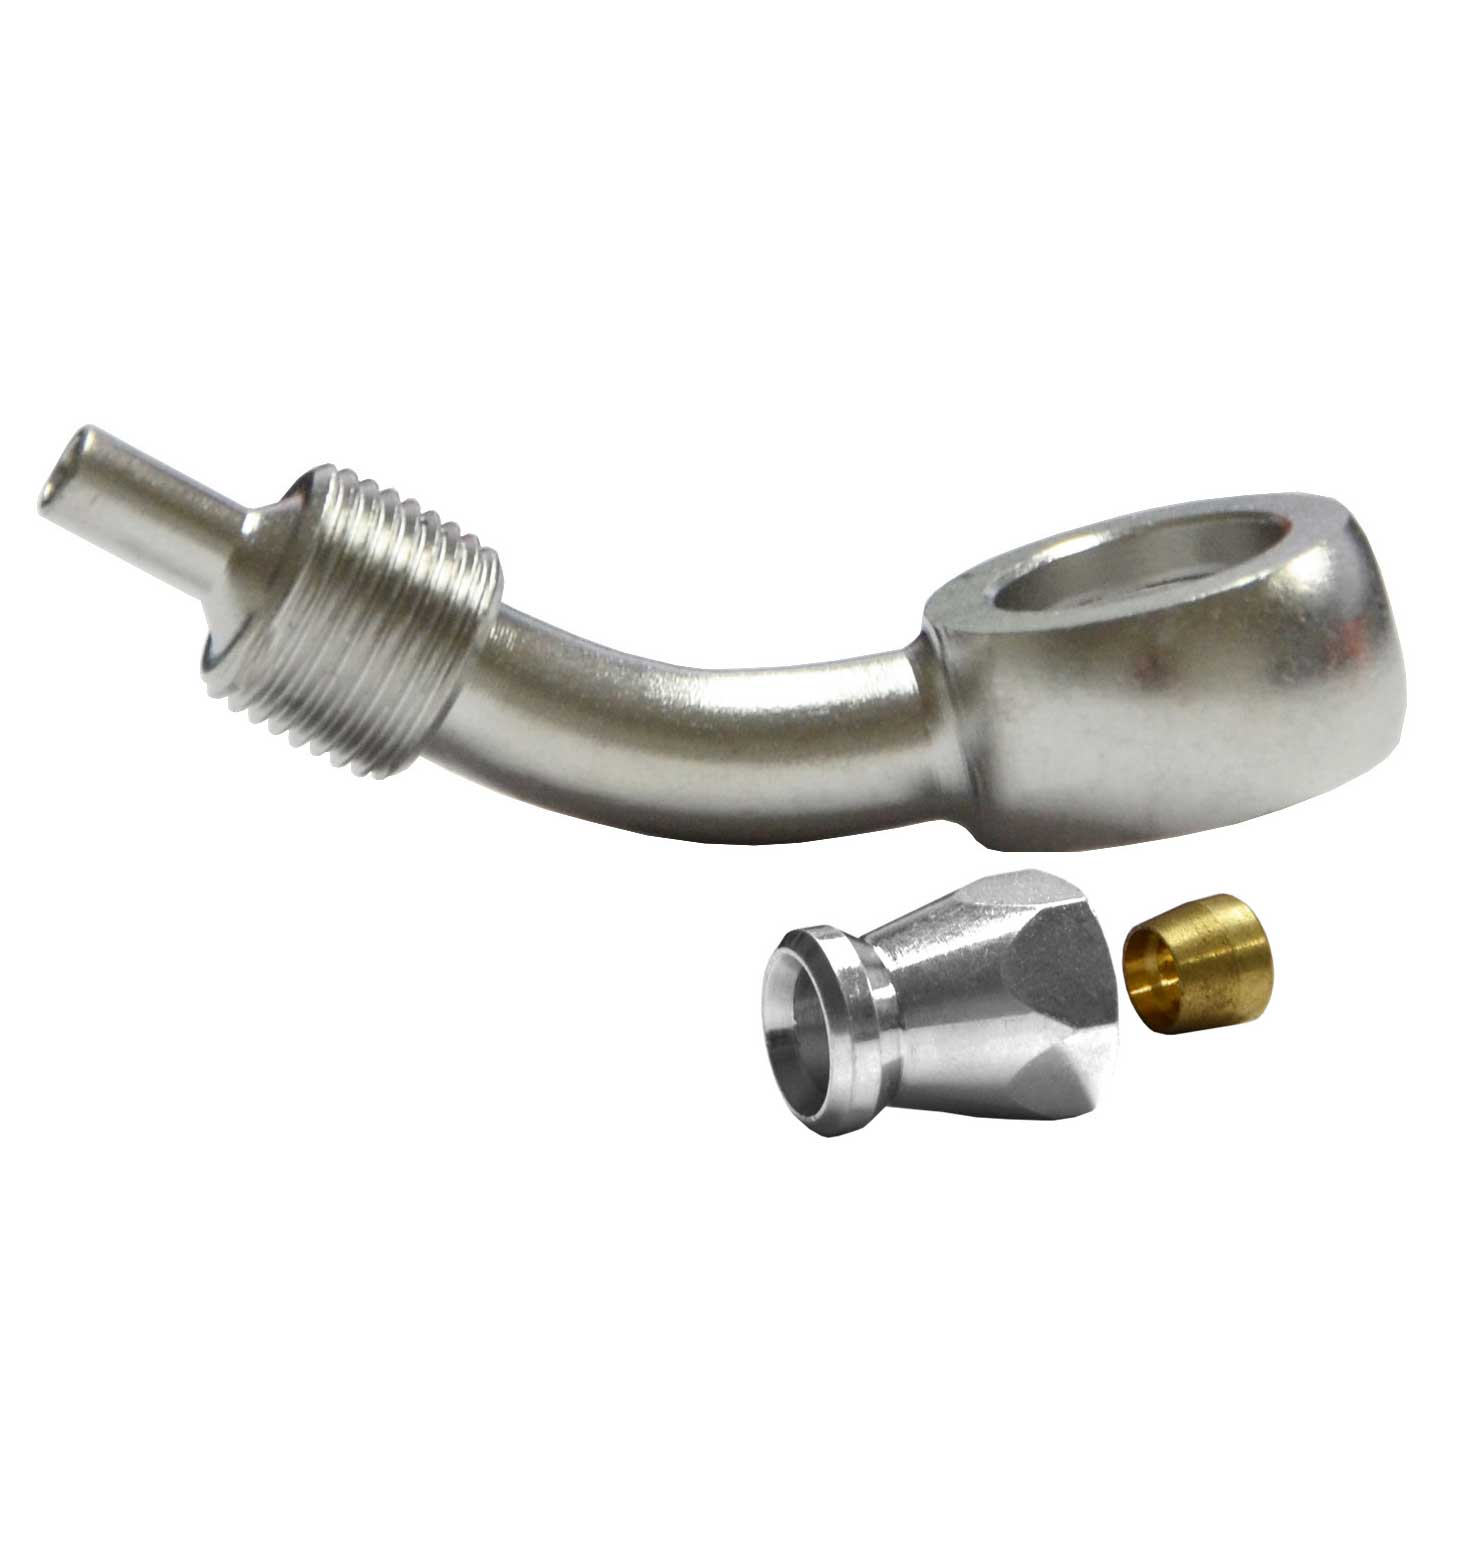 7/16" 45 Degree Banjo Fitting for AN-3 (3mm) - Zinc Plated